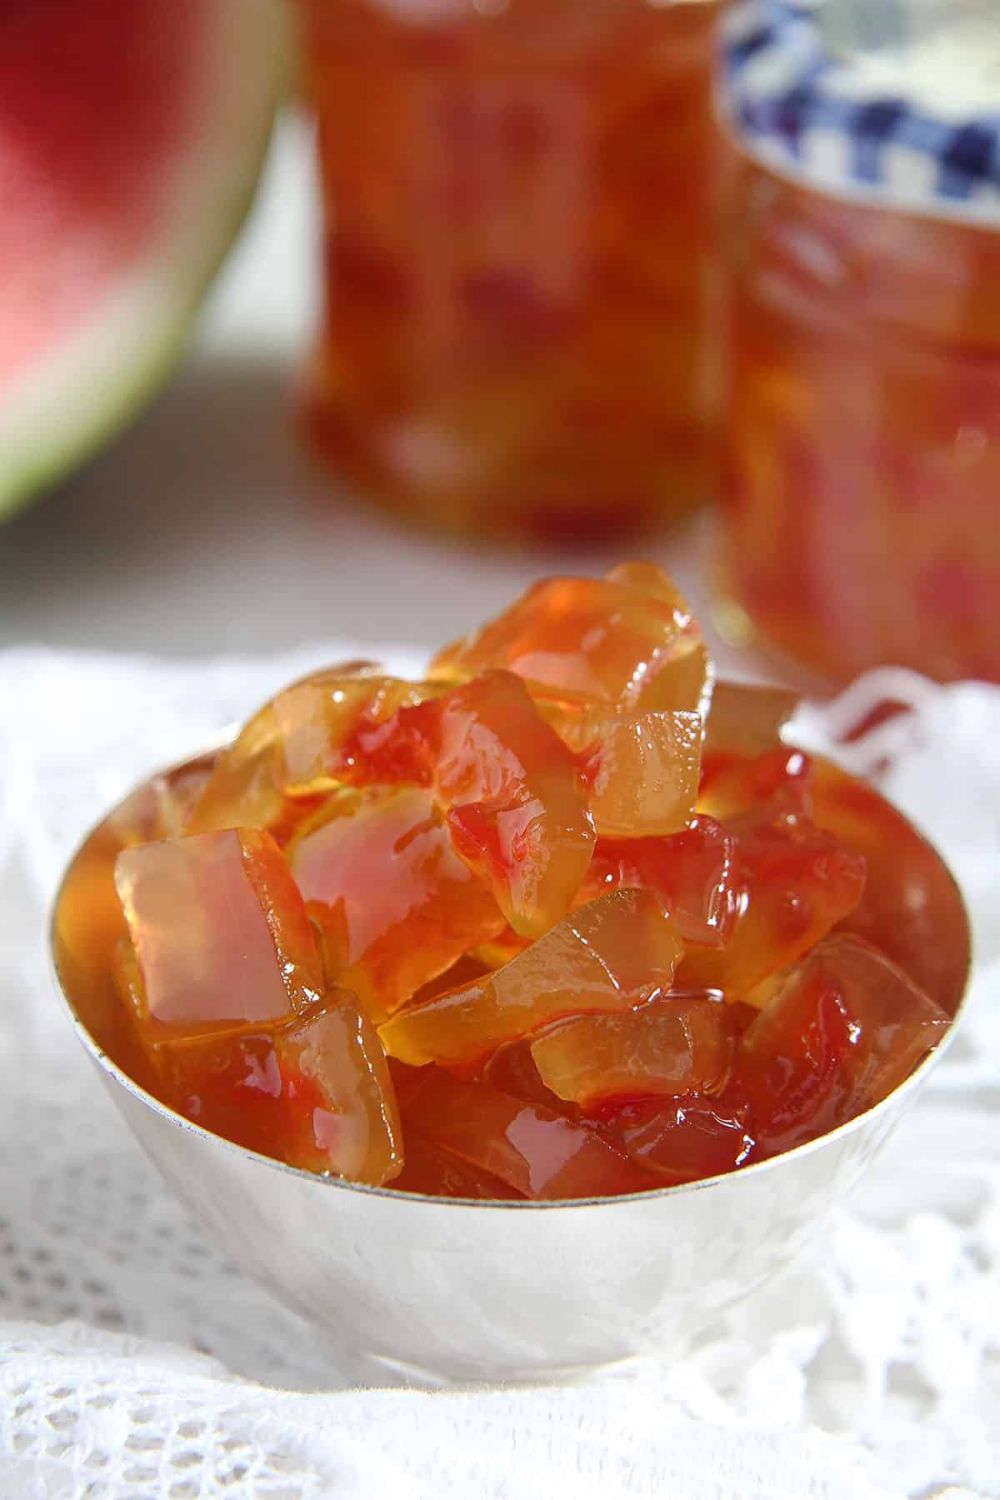 Candied Watermelon Rind or Watermelon Rind Jam